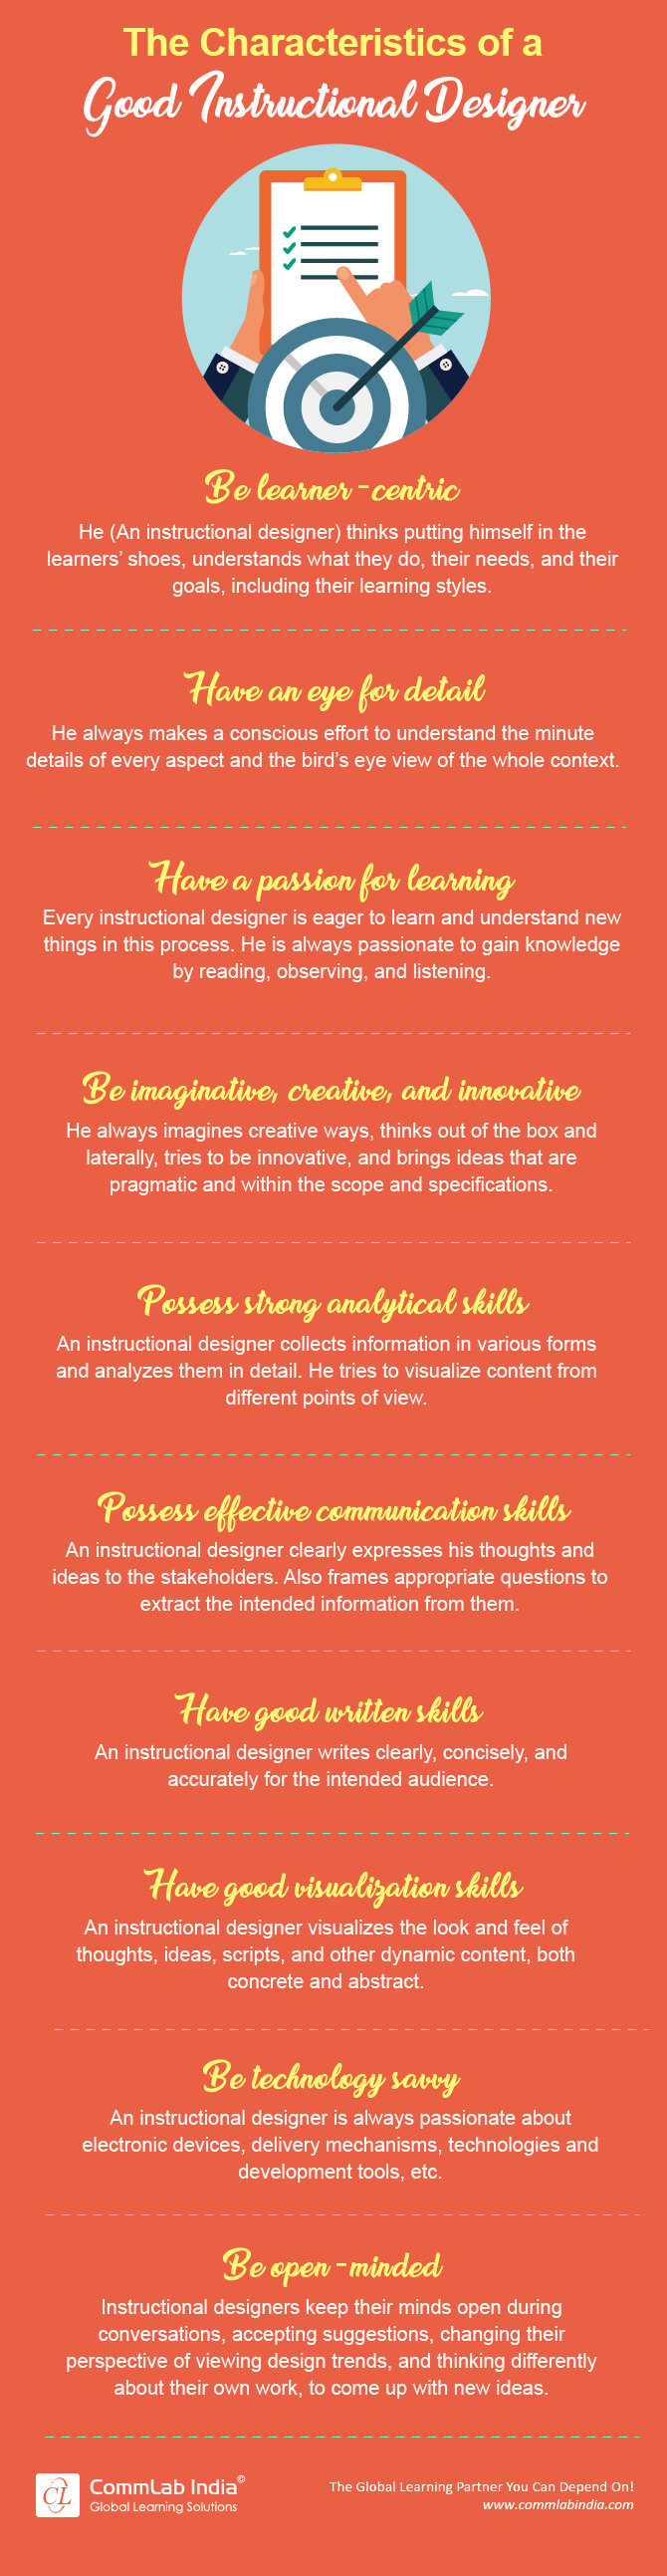 The Characteristics of a Good Instructional Designer [Infographic]